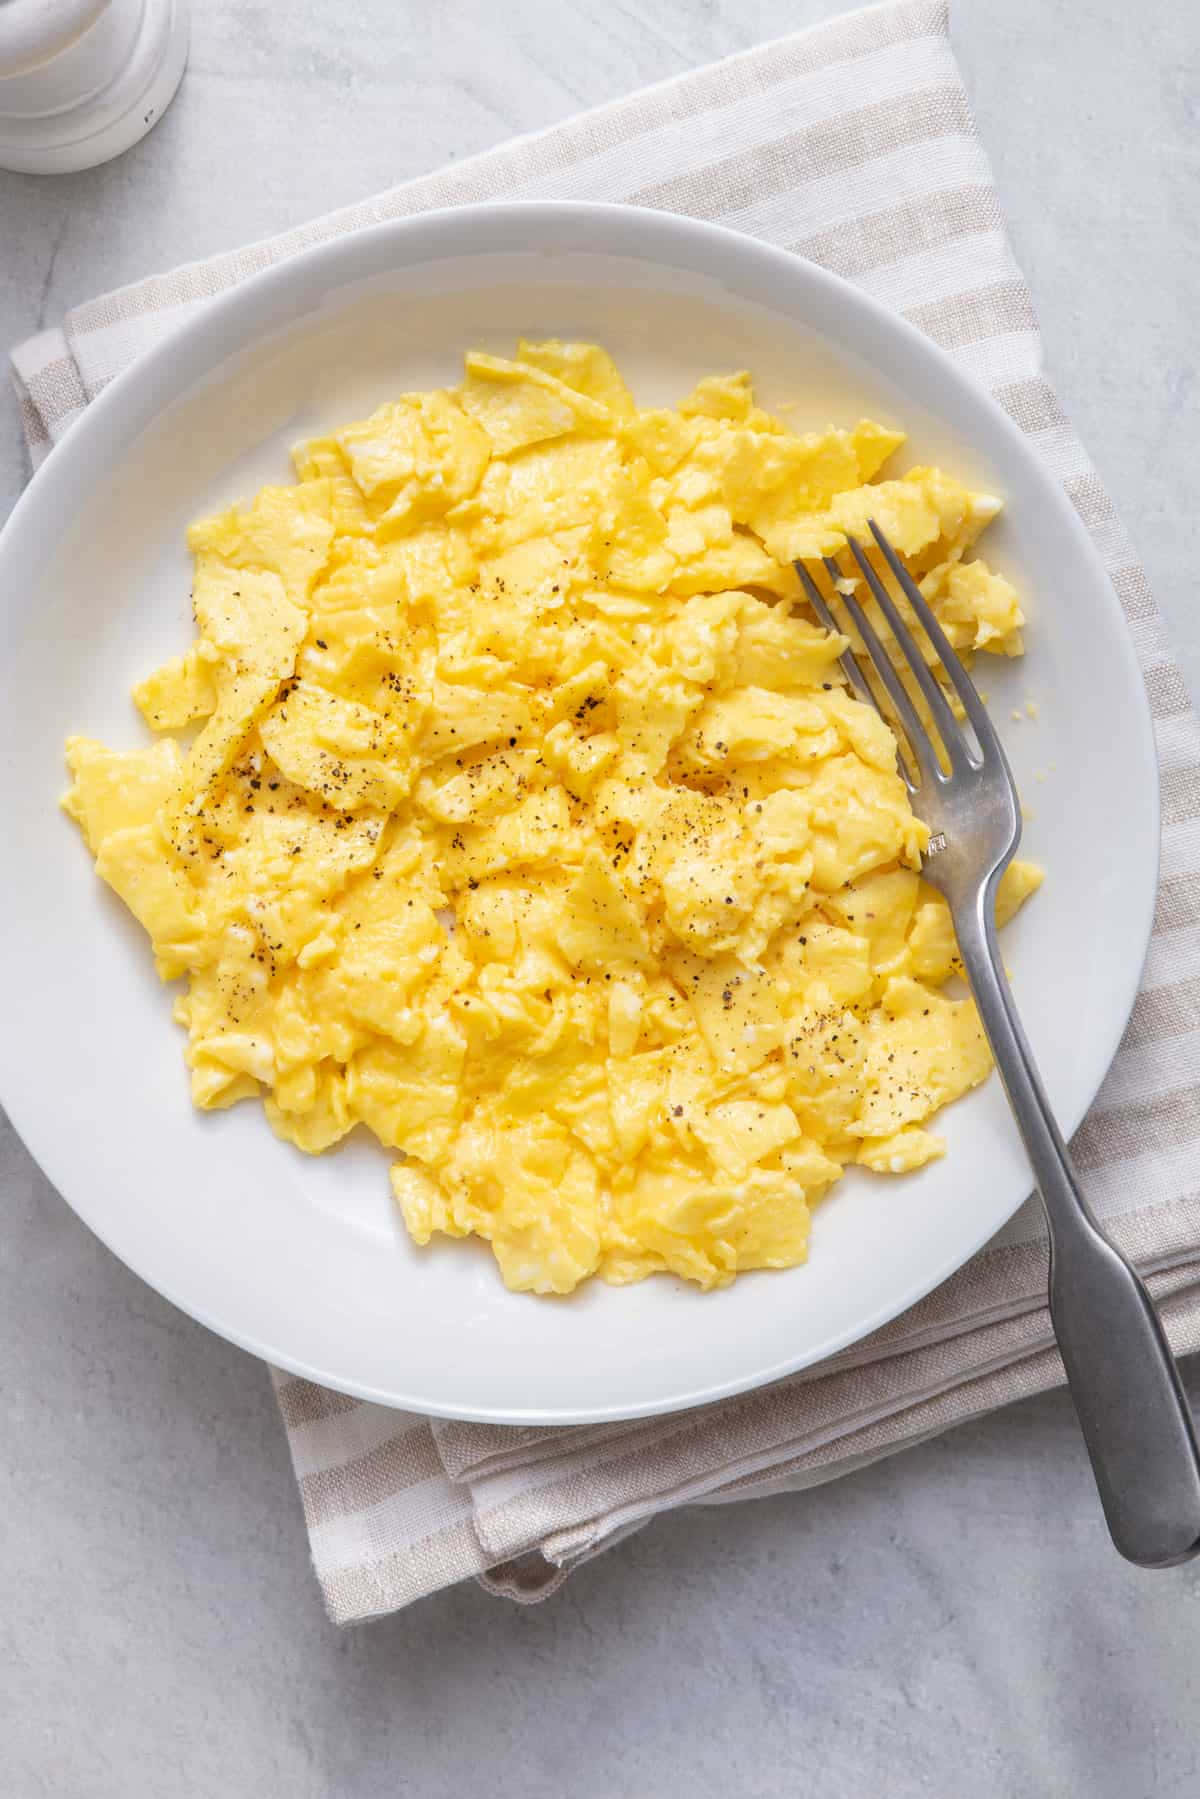 A plate of freshly cooked scrabbled eggs